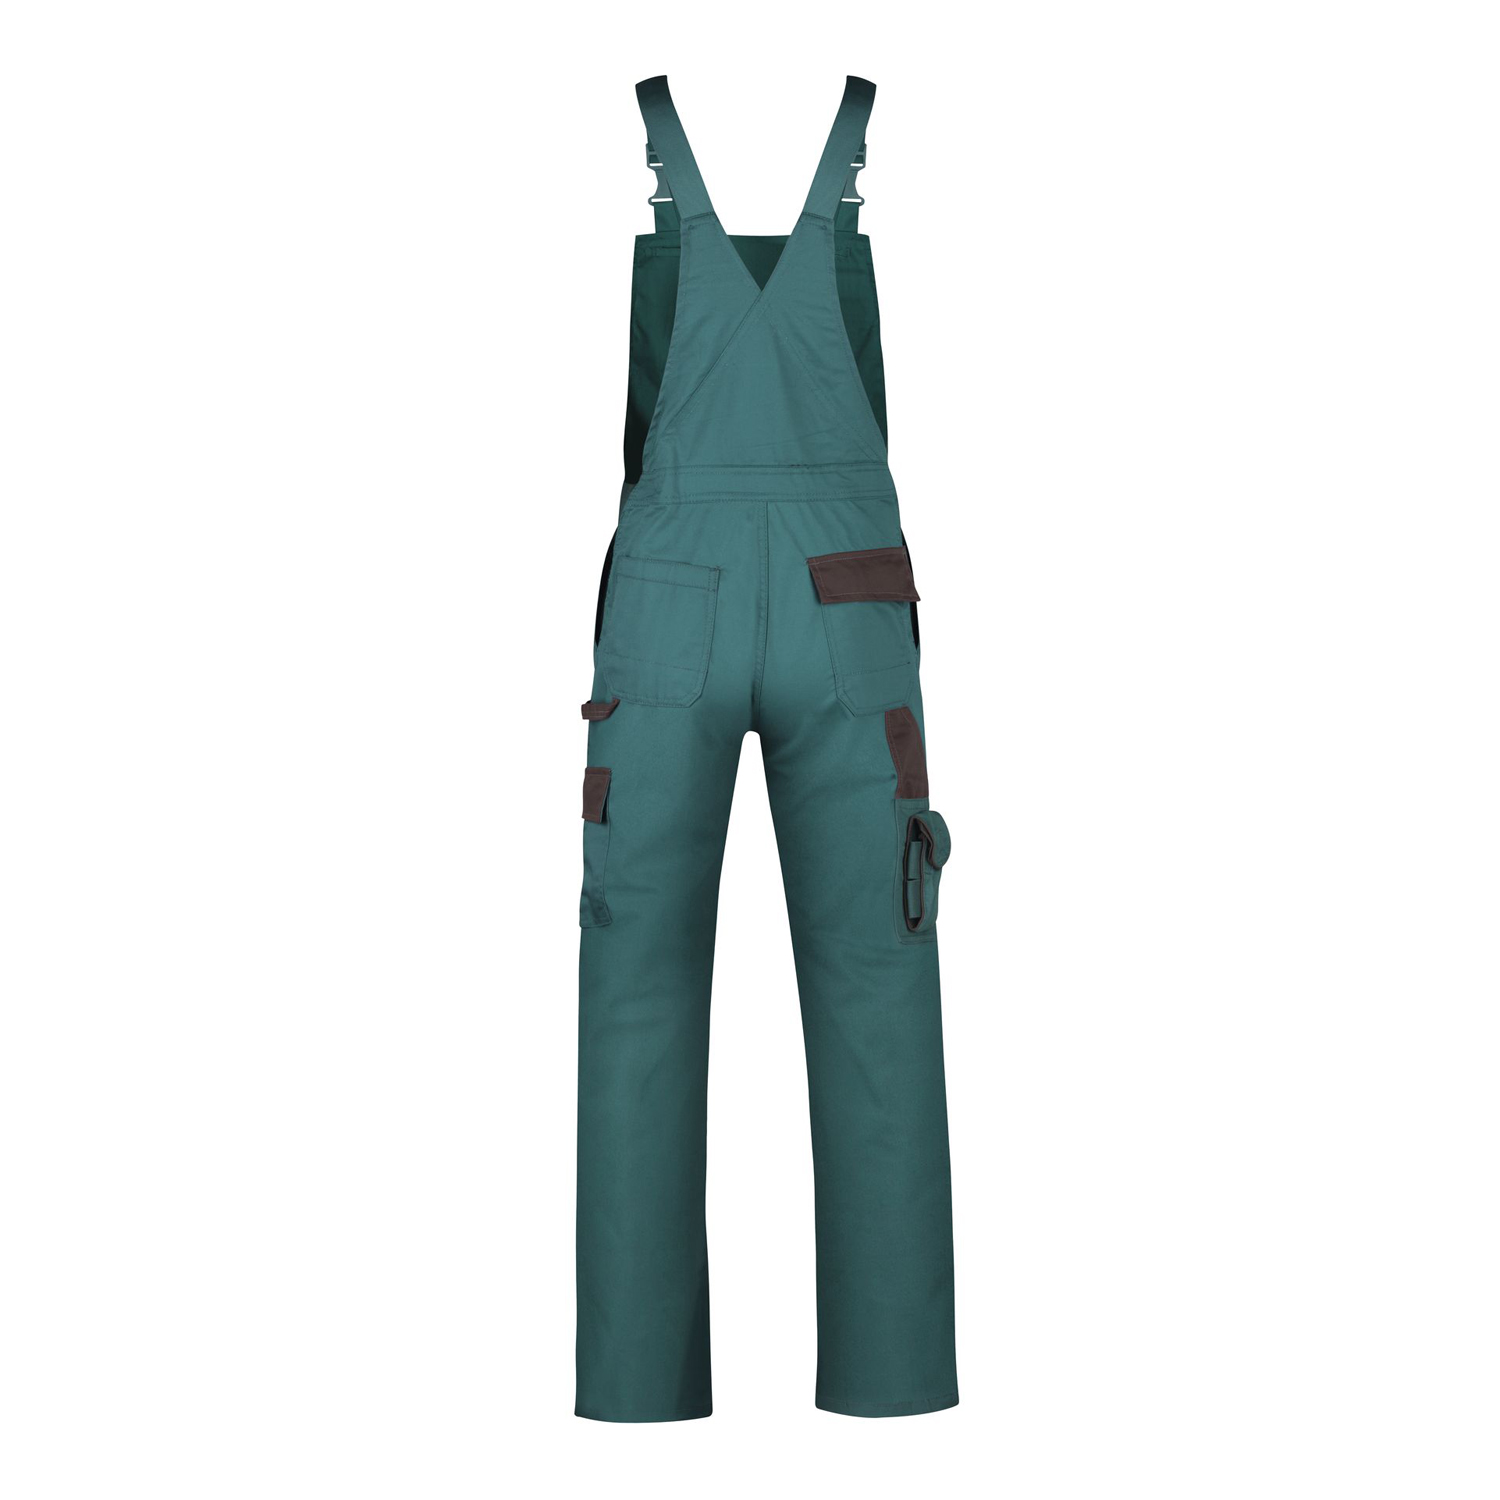 Workingclothes, Pants by PKA Klöcker in green, large sizes up to 74